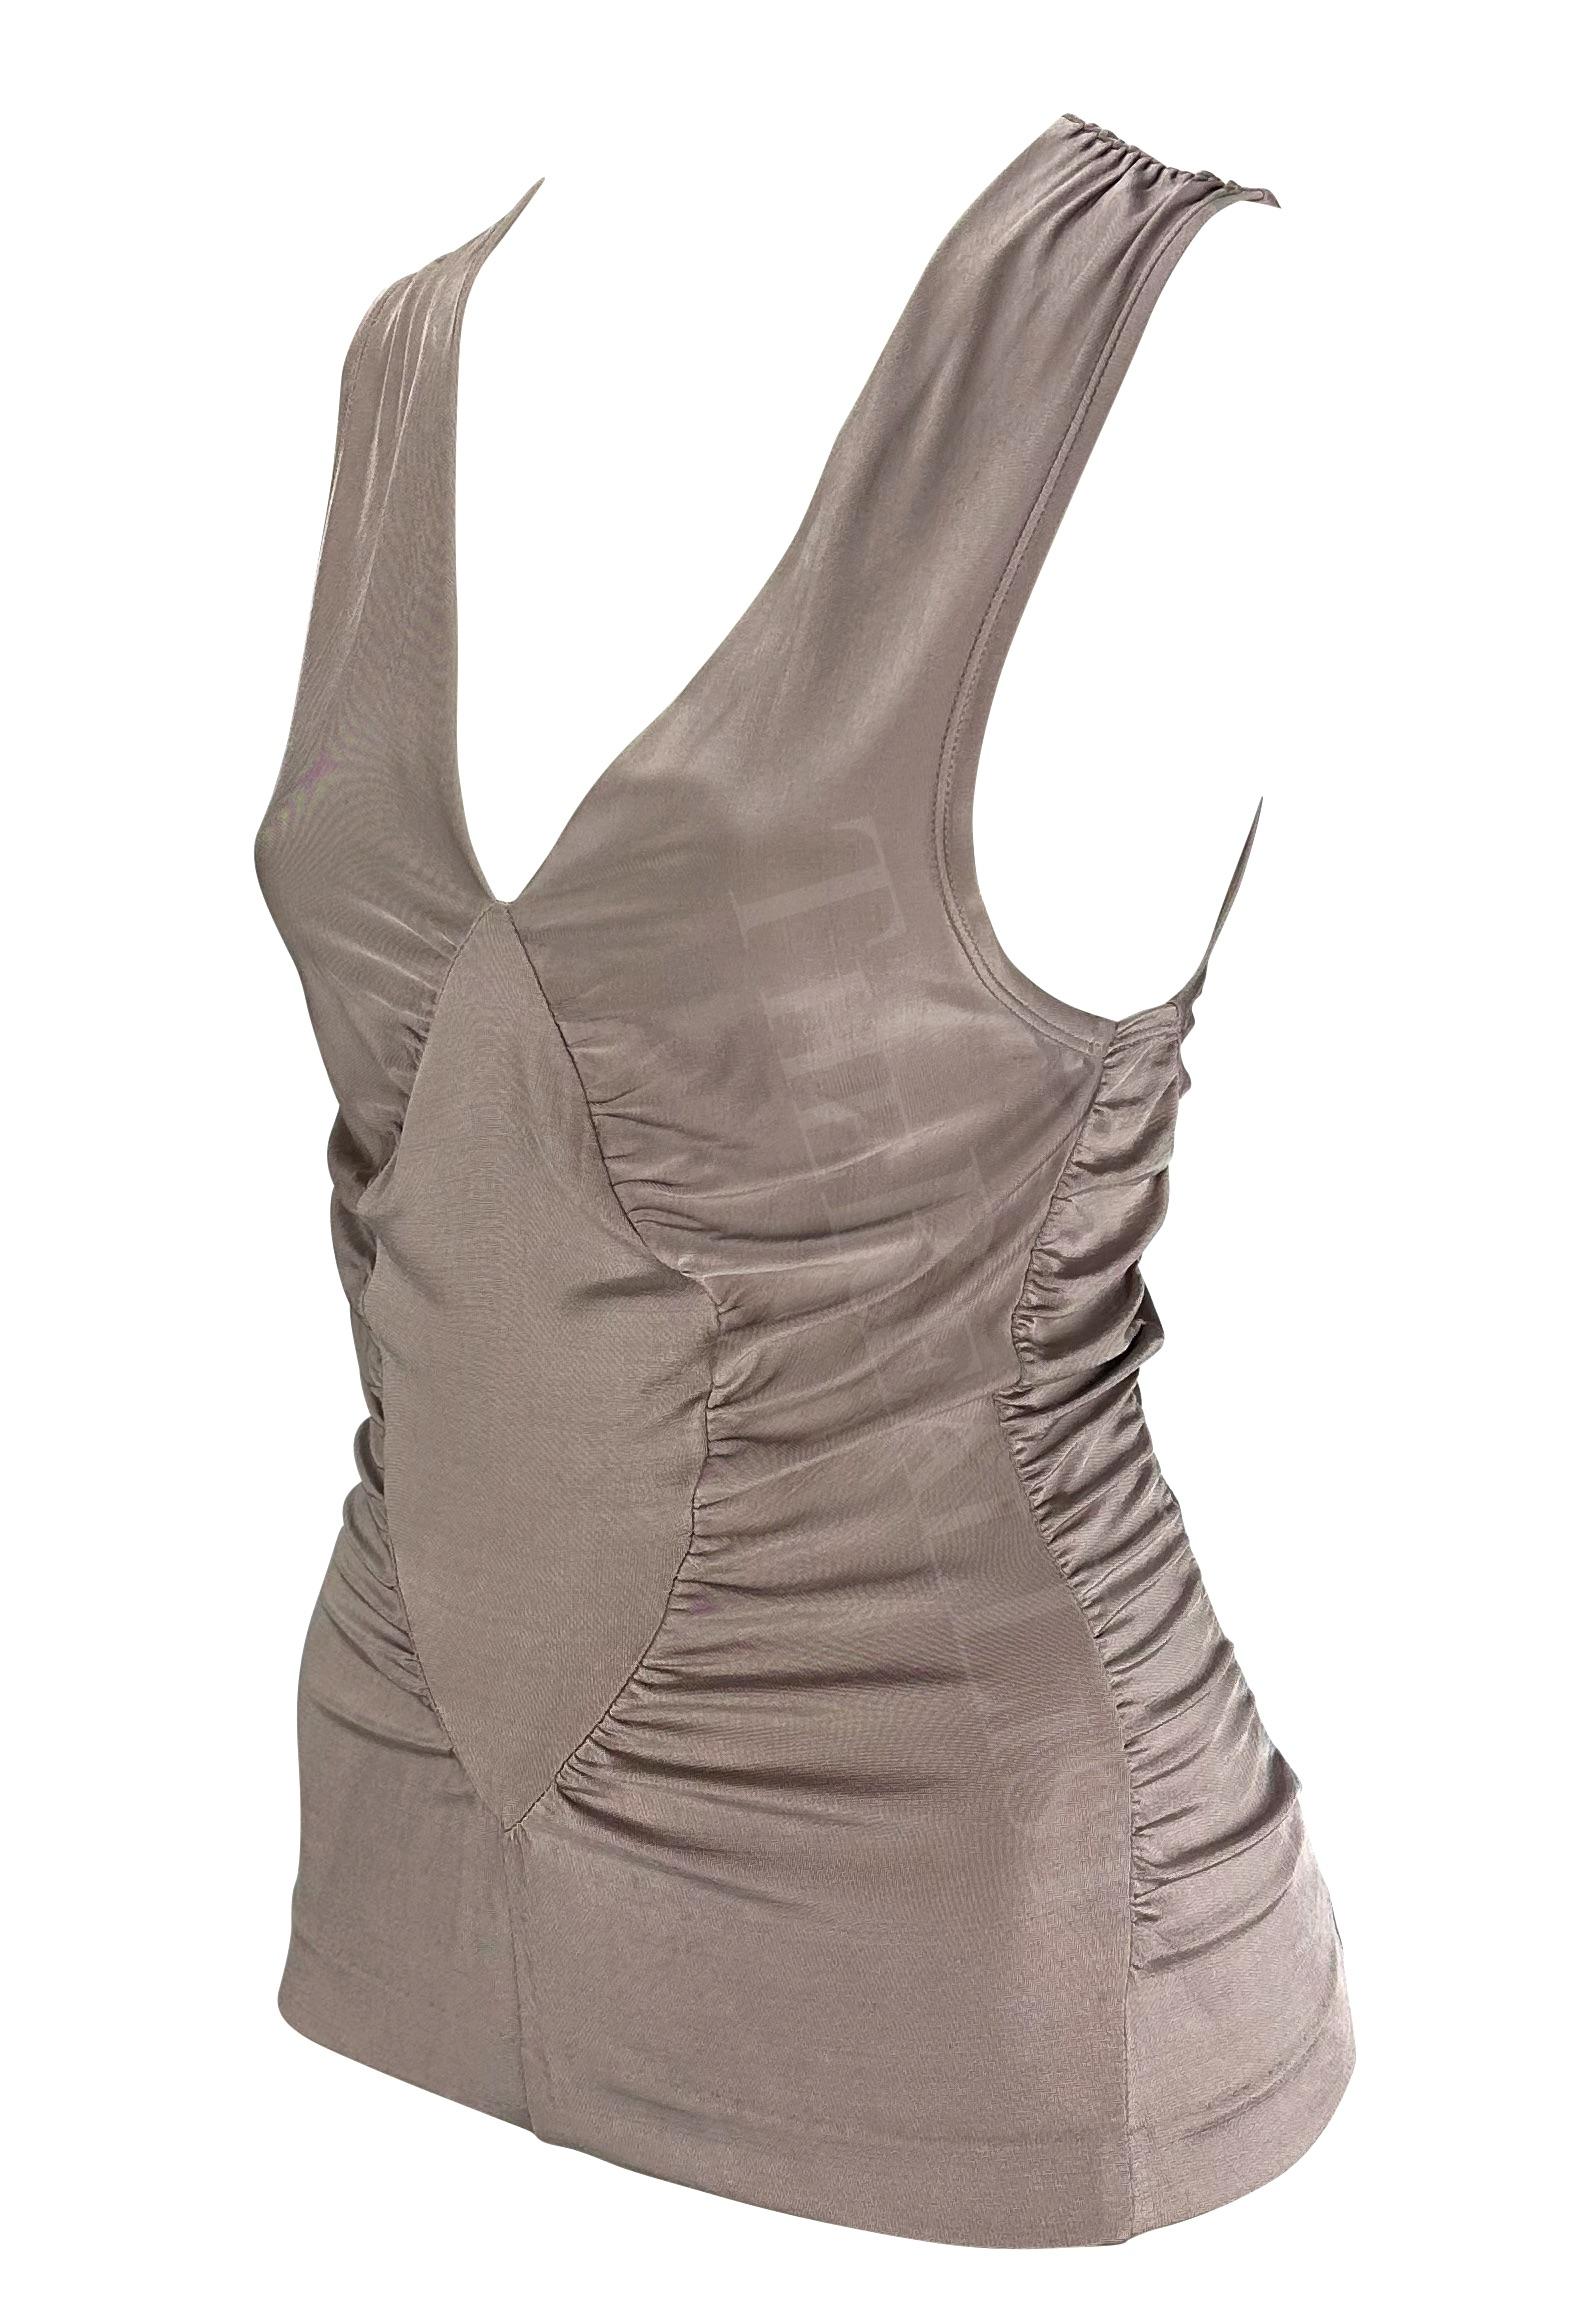 Presenting an incredible blush Yves Saint Laurent sleeveless top, designed by Tom Ford. From the Spring/Summer 2003 collection, this slinky top features ruching throughout and a diamond panel at the back and front. Many pieces from the Fall/Winter